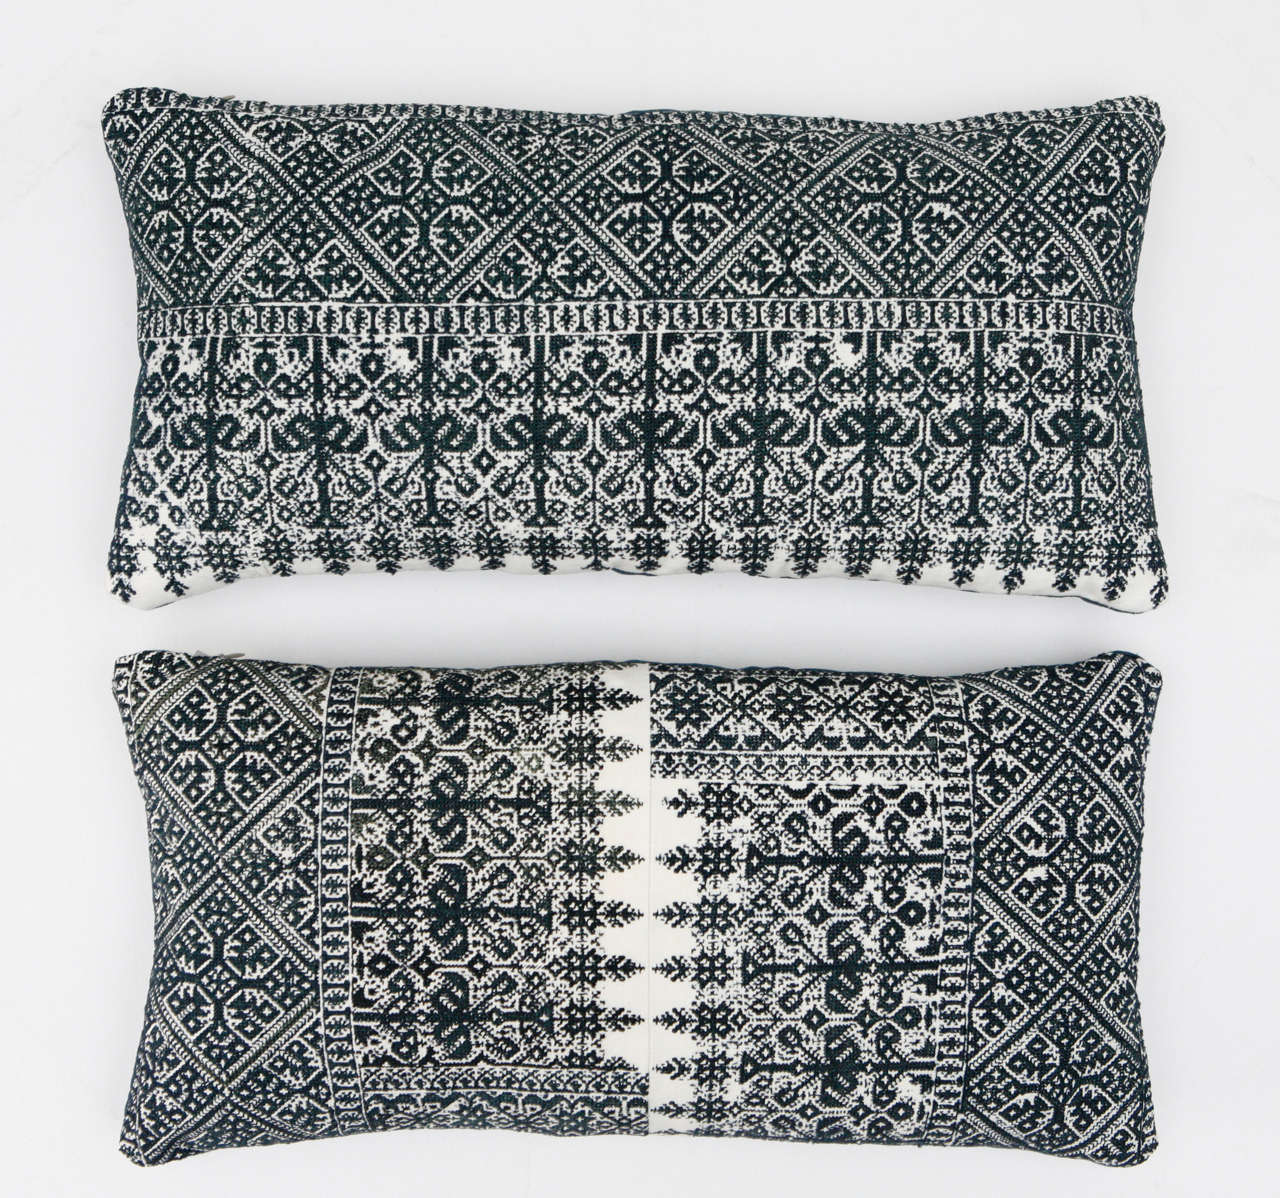 Antique Moroccan textiles from the city of Fez. Intricate all-over silk floss on cotton embroidery produces a durable fabric. Bottom image is made up of two panels sewn in the middel. The designs are based on centuries old Mehindi (henna hand